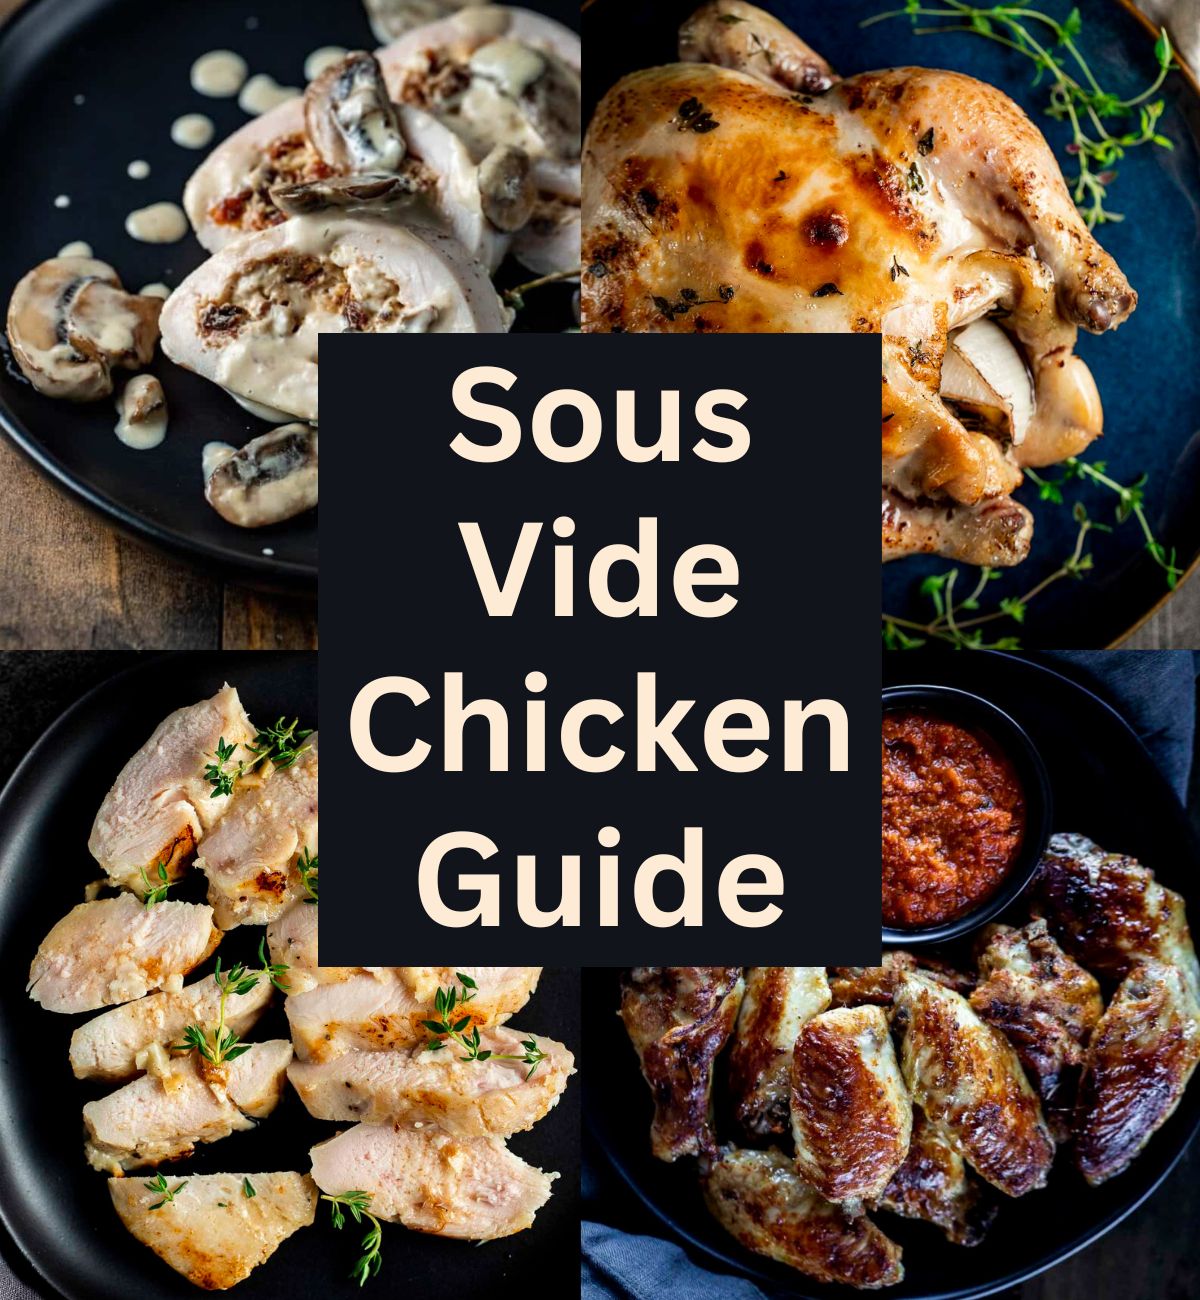 photos of chicken dishes with text overlay